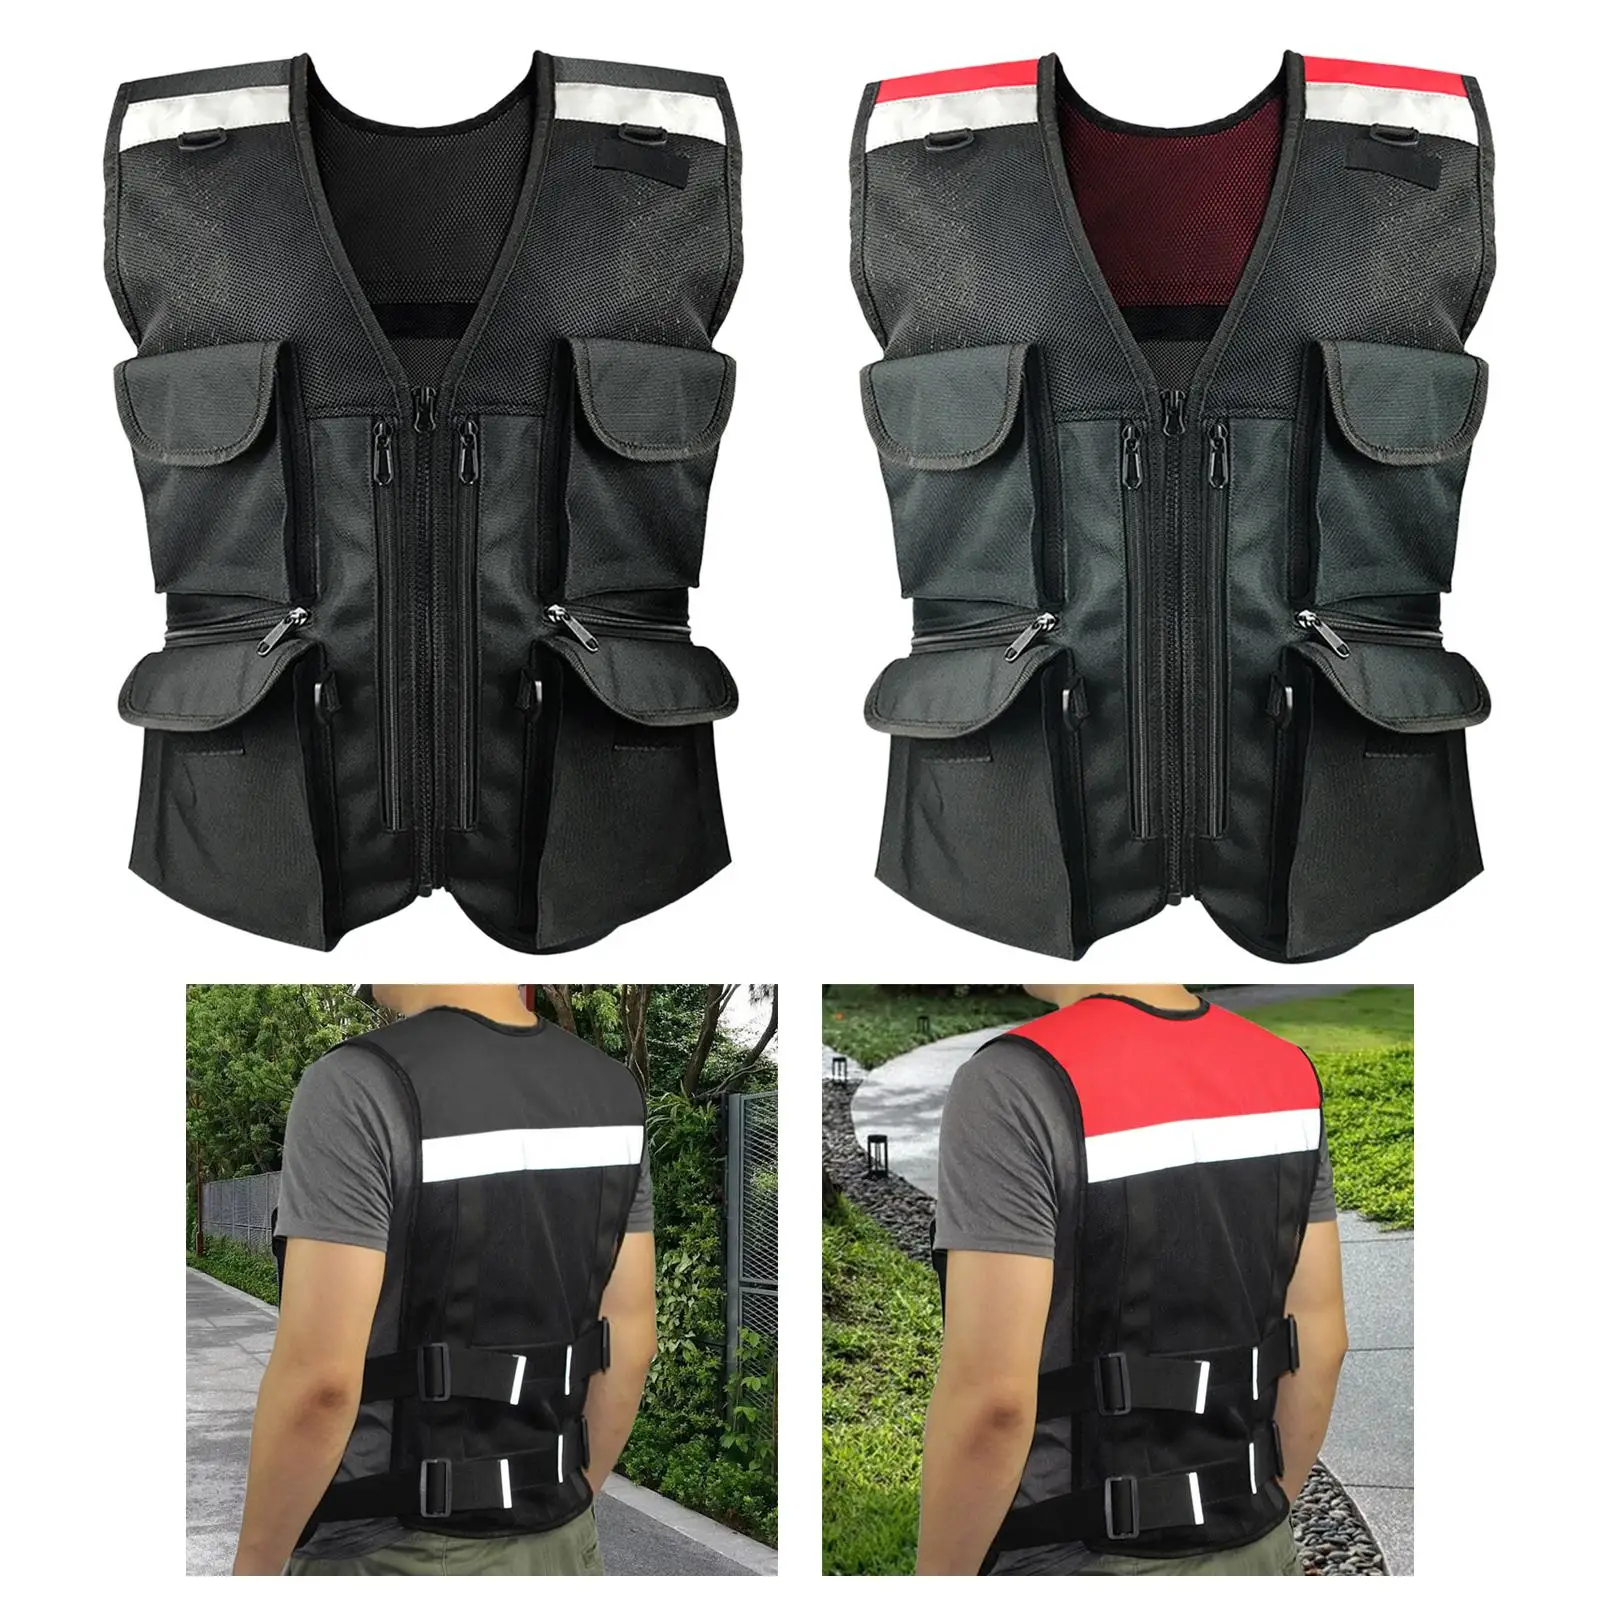 Reflective Safety Vest with Reflective Strips Construction Vest for Running Motorcycle Riding Walking at Night Outdoor